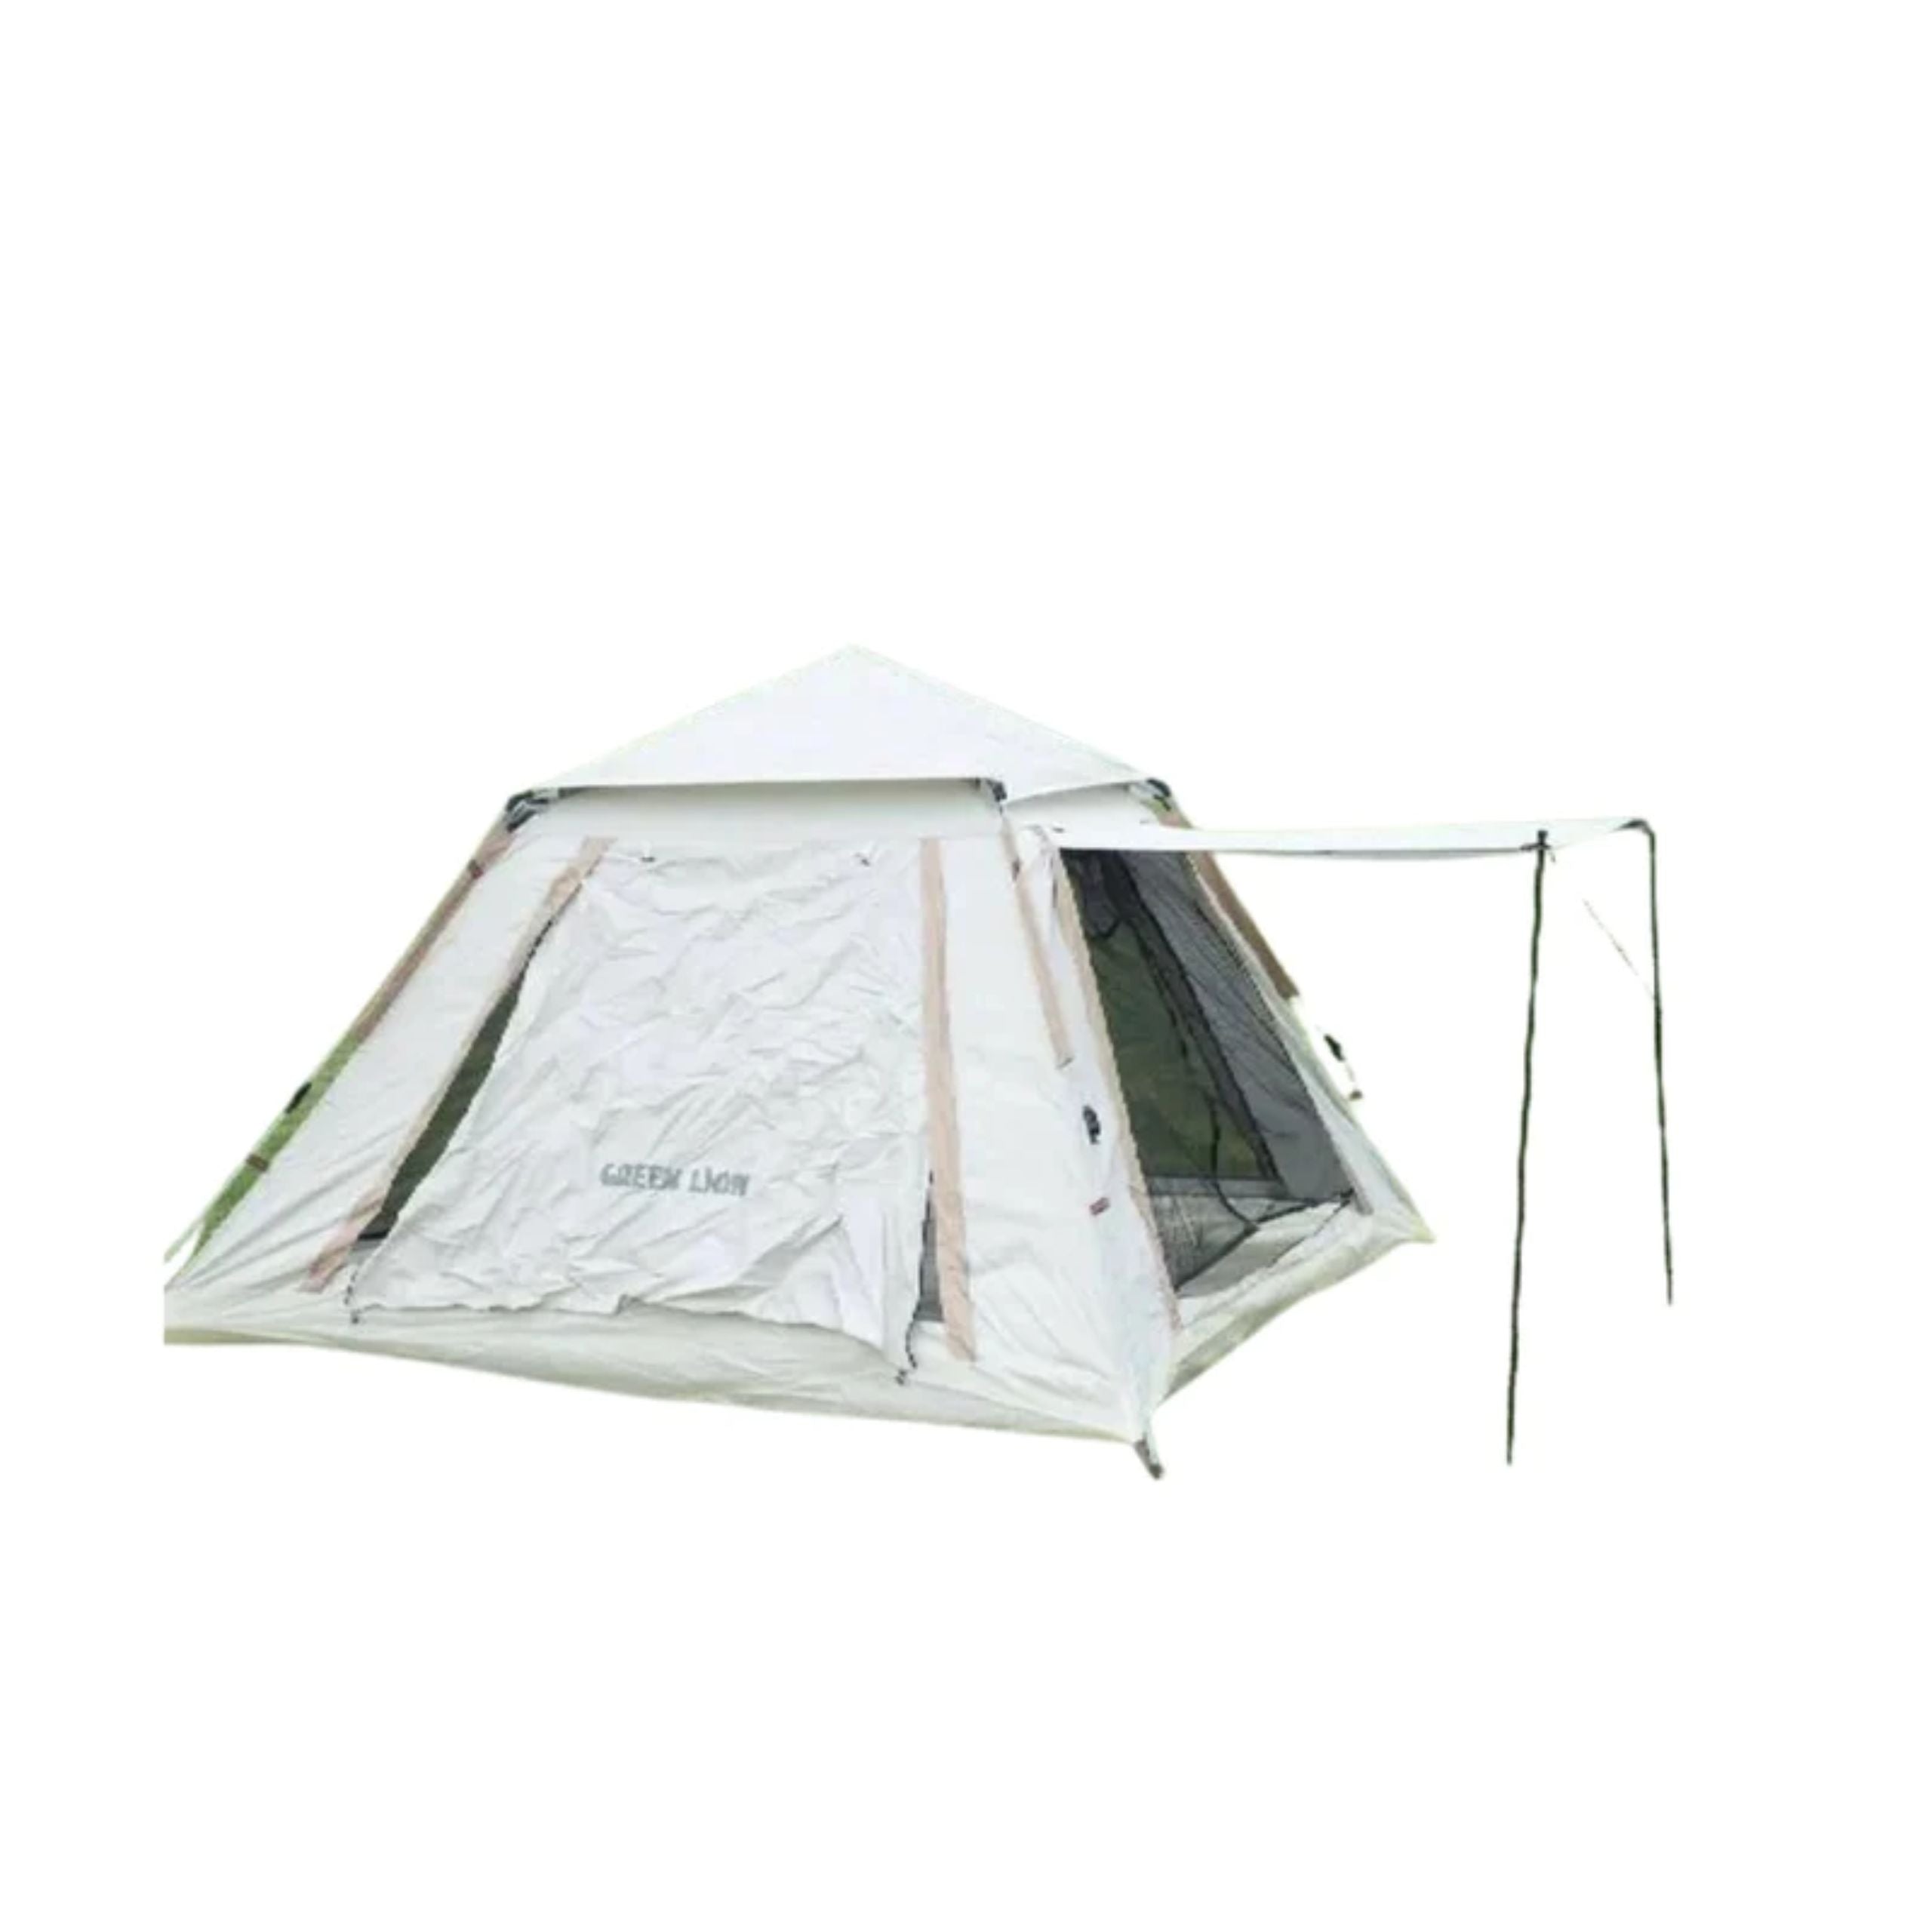 Green Lion Camping Tent 5-6 People GT-6 GL-T028 - Beige